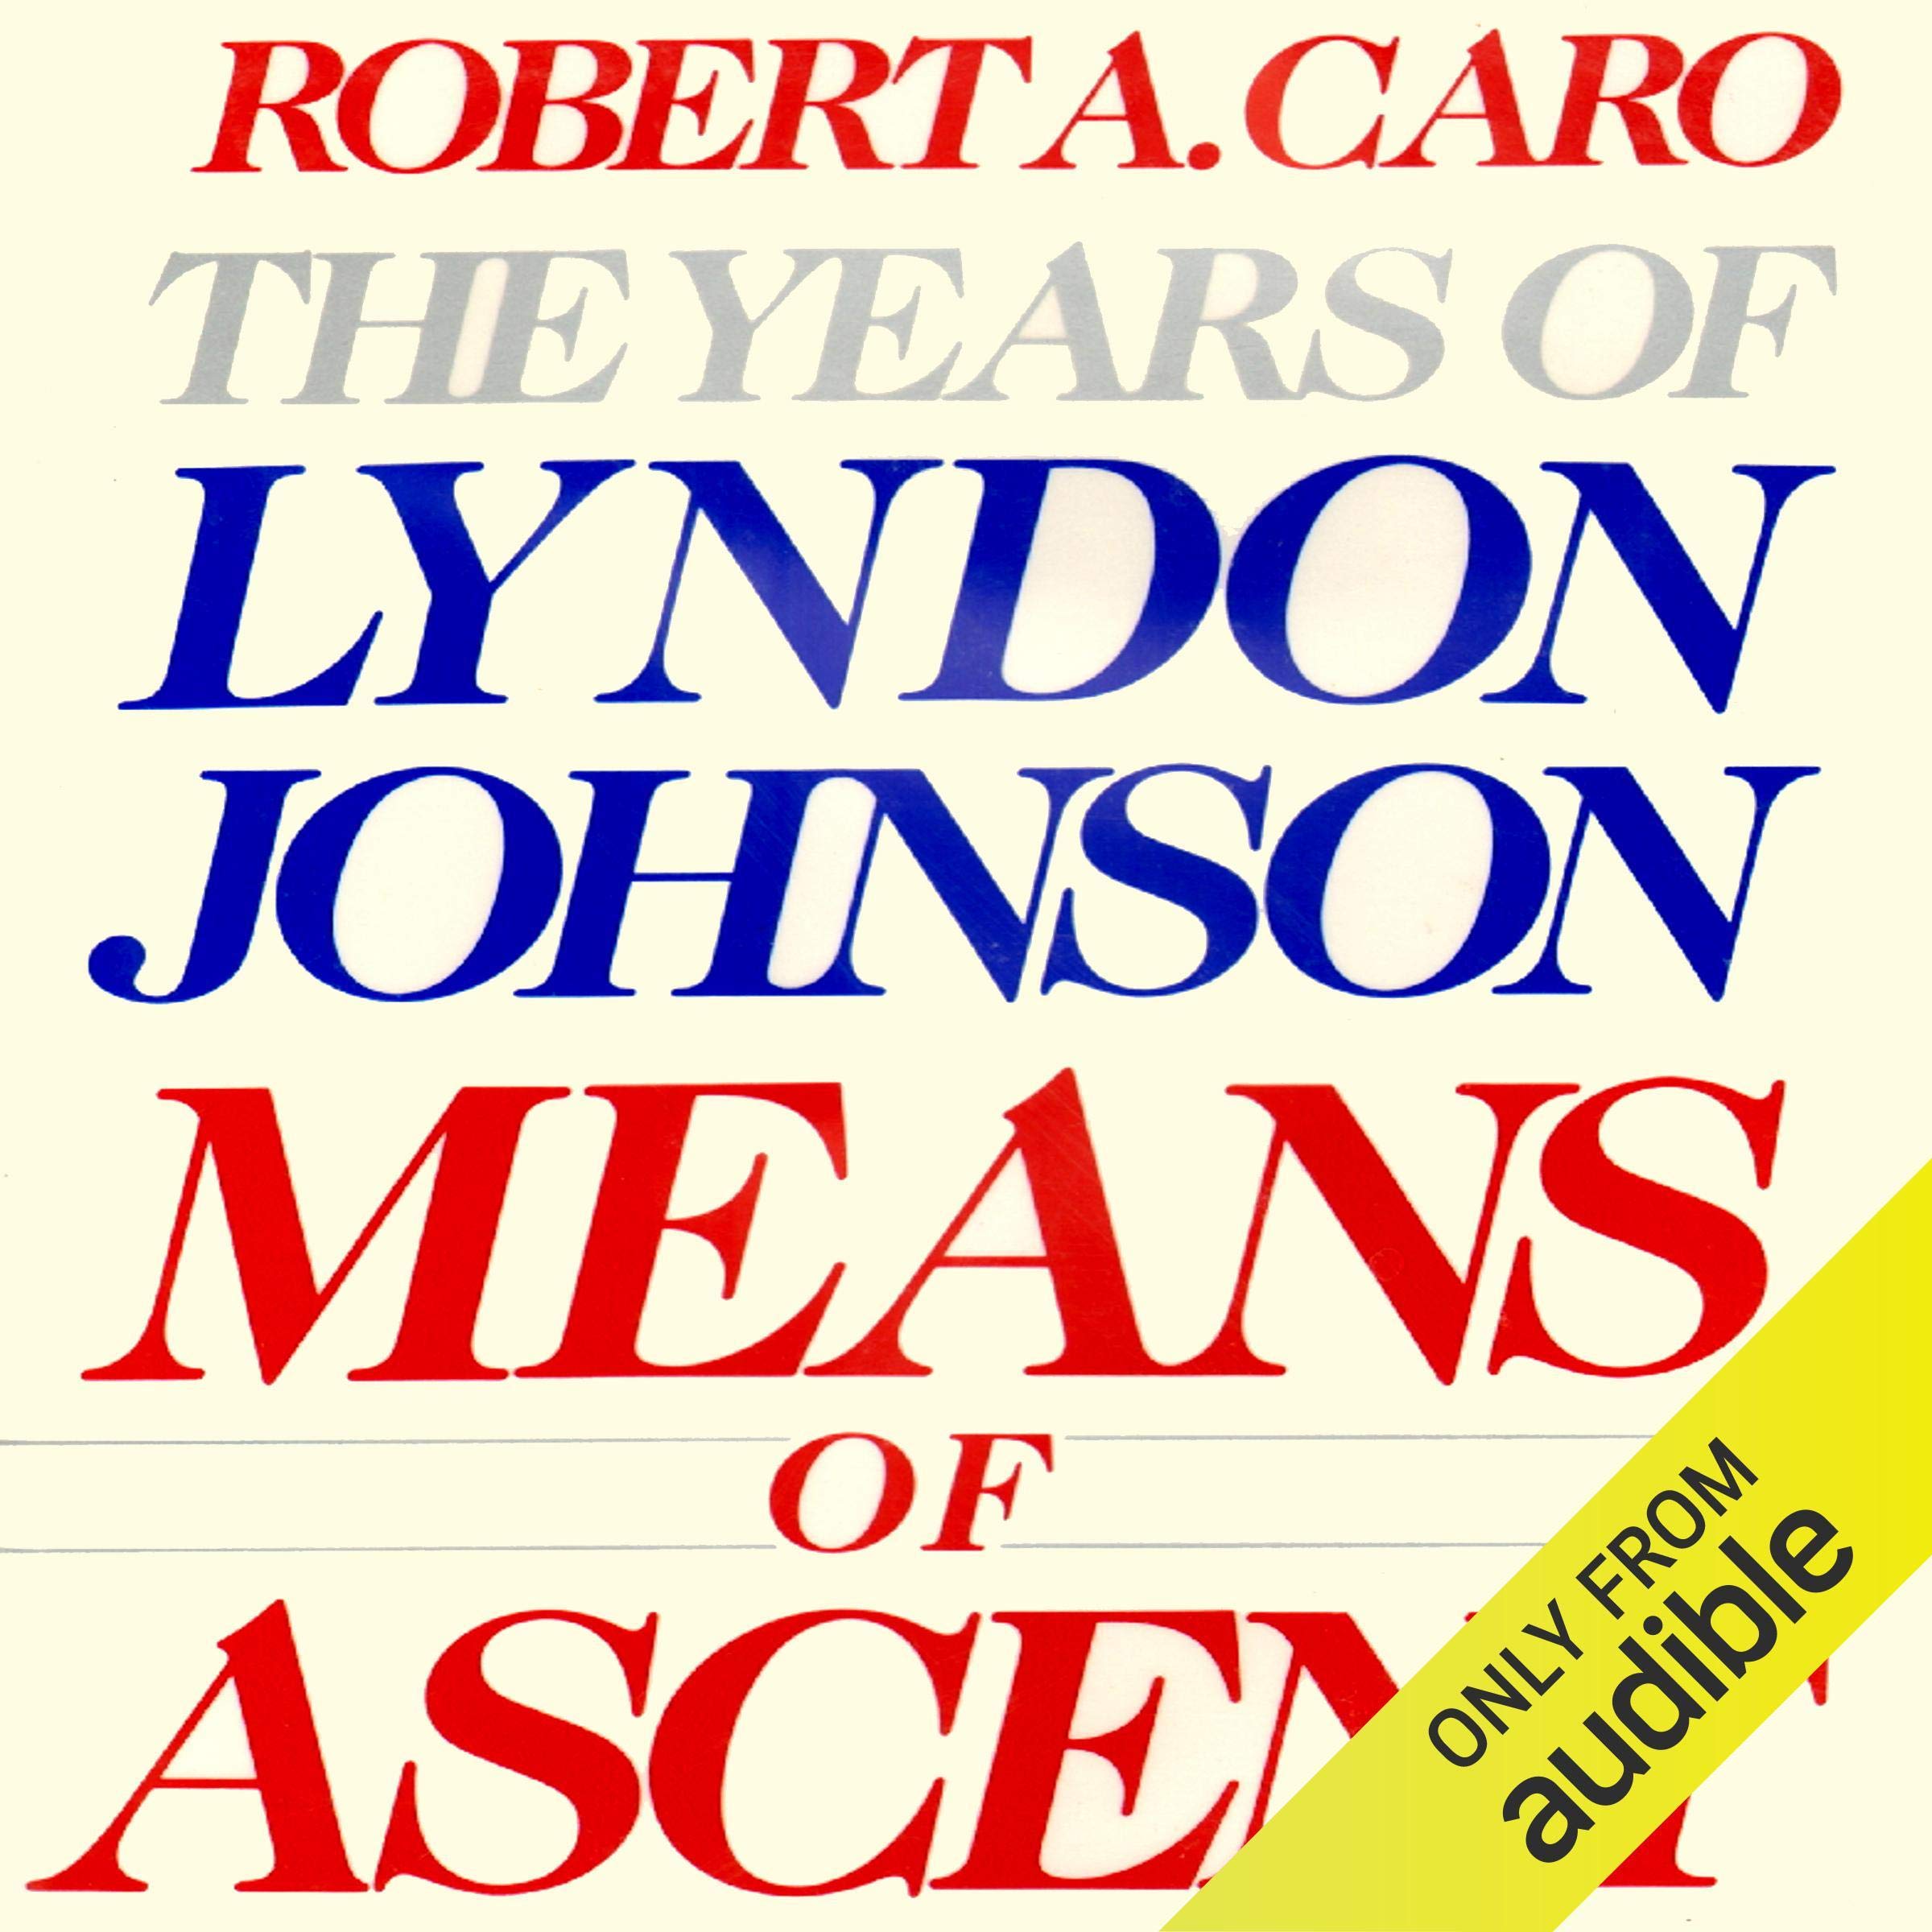 Means of Ascent: The Years of Lyndon Johnson